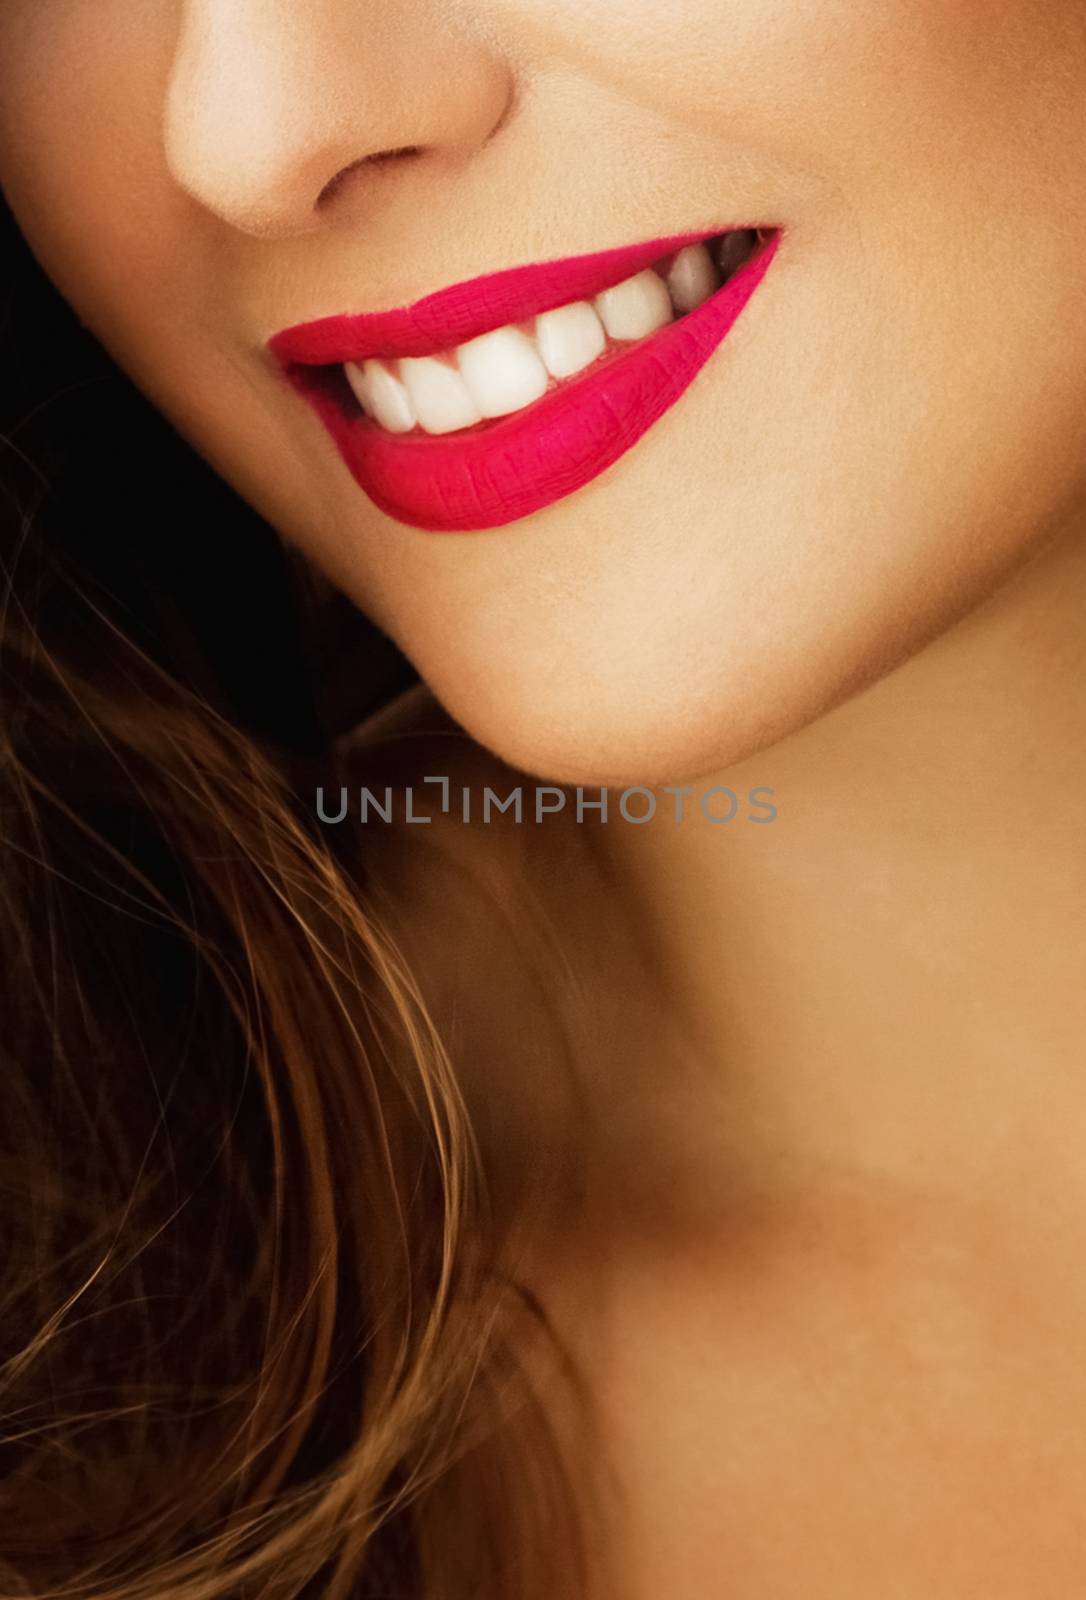 Cheerful healthy female smile with perfect natural white teeth, beauty face closeup of smiling young woman, bright lipstick makeup and clean skin for dental and healthcare brands